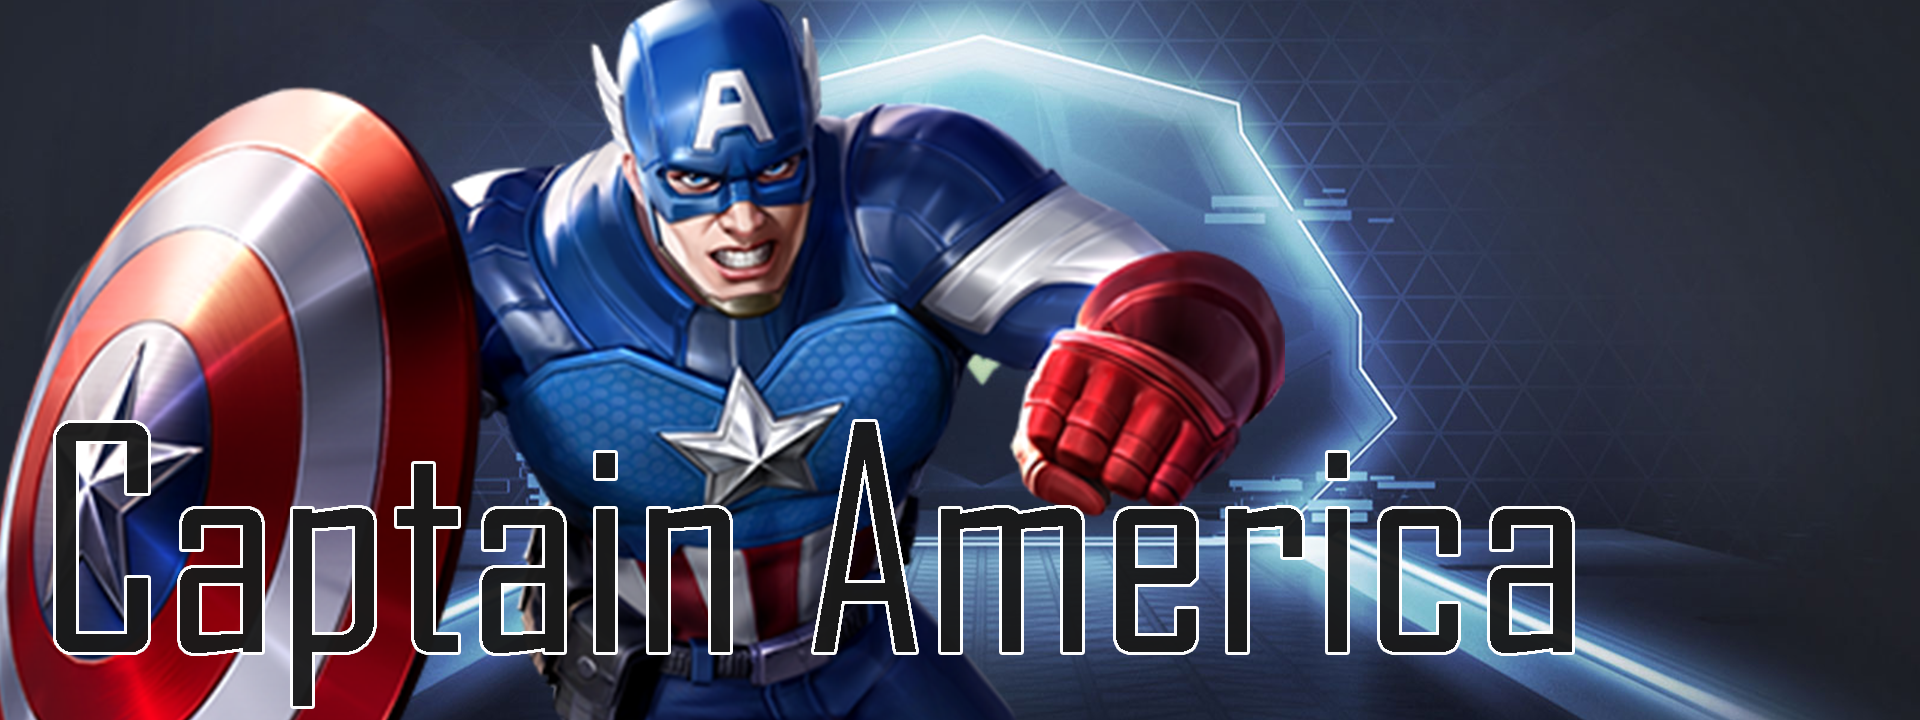 Captain America - Marvel Super War Guide and Tips